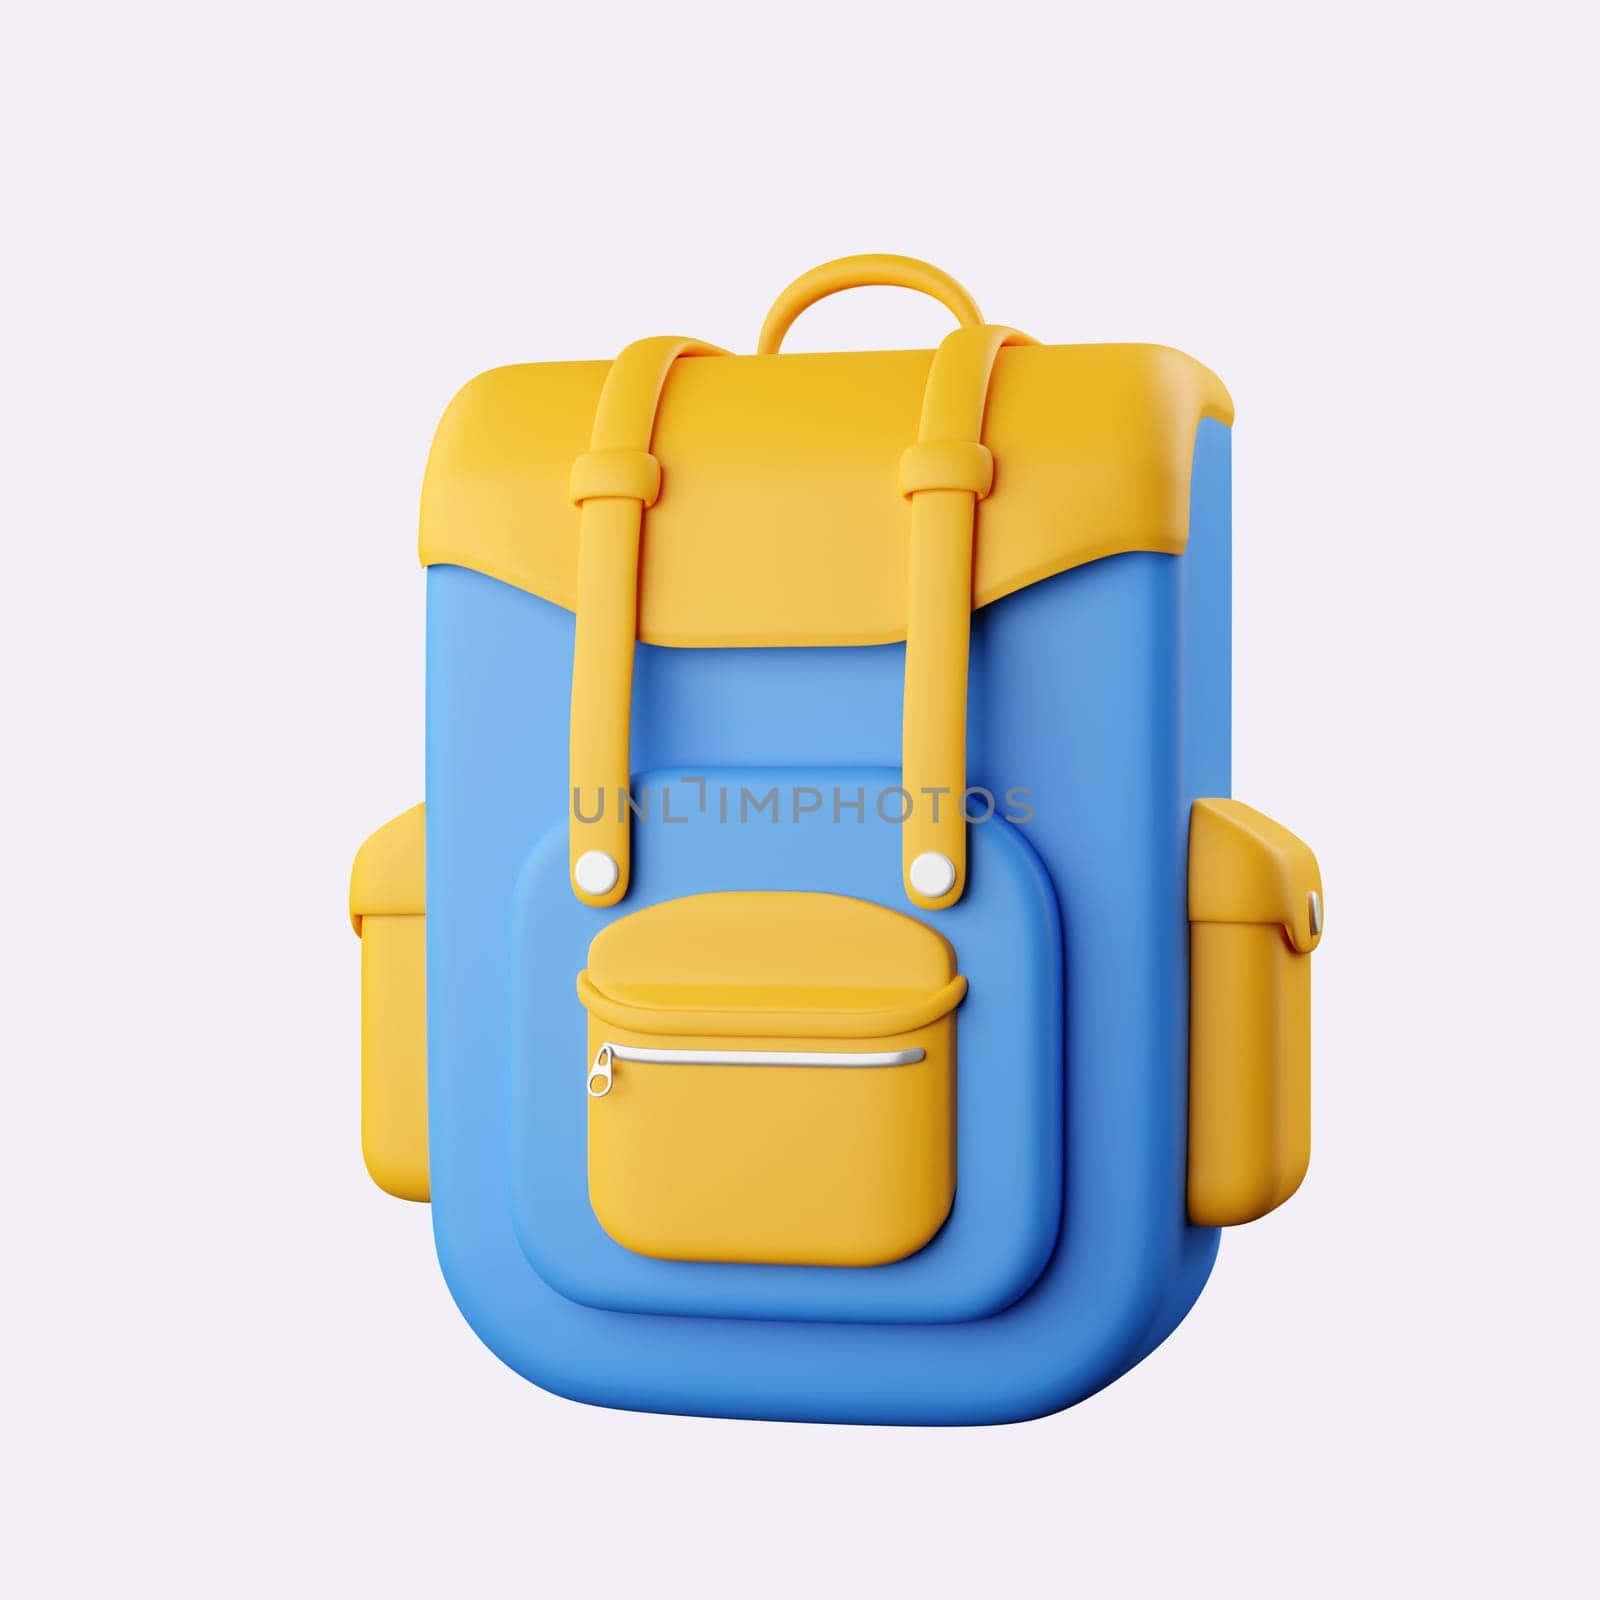 3d school bag icon. Back to school and education concept. isolated on background, icon symbol clipping path. 3d render illustration.